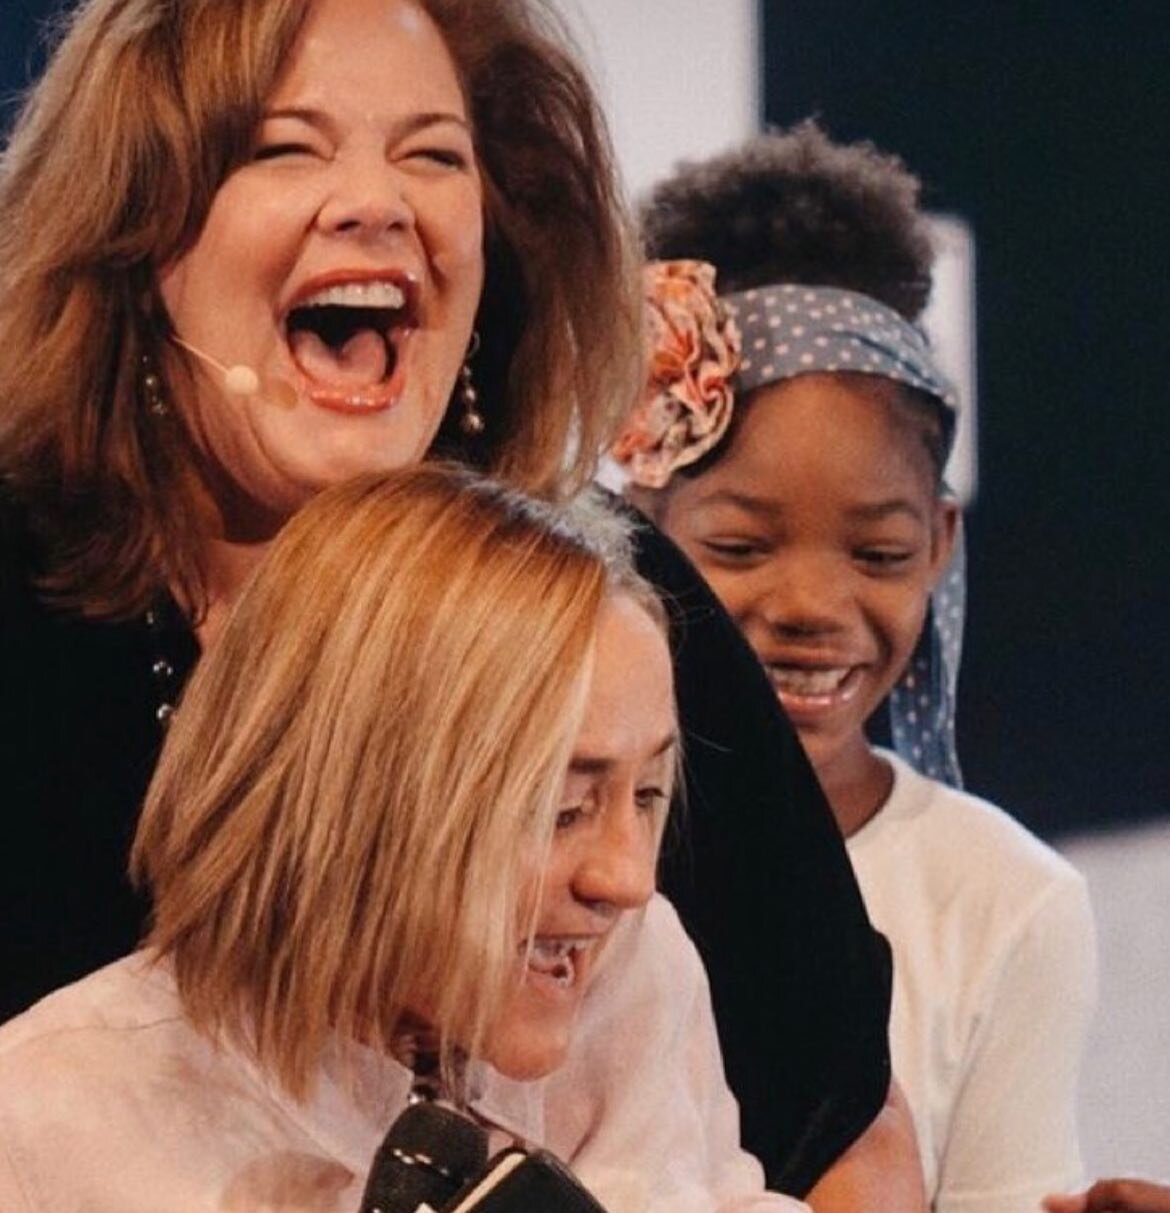 @lisadharper is with us September 24th! And this is us inviting her best friend to come along @christinecaine , what do say? Girls weekend?!😂

There&rsquo;s nothing like Georgia 🍑&rsquo;s, just saying! 

Don&rsquo;t forget to register ladies! Ticke